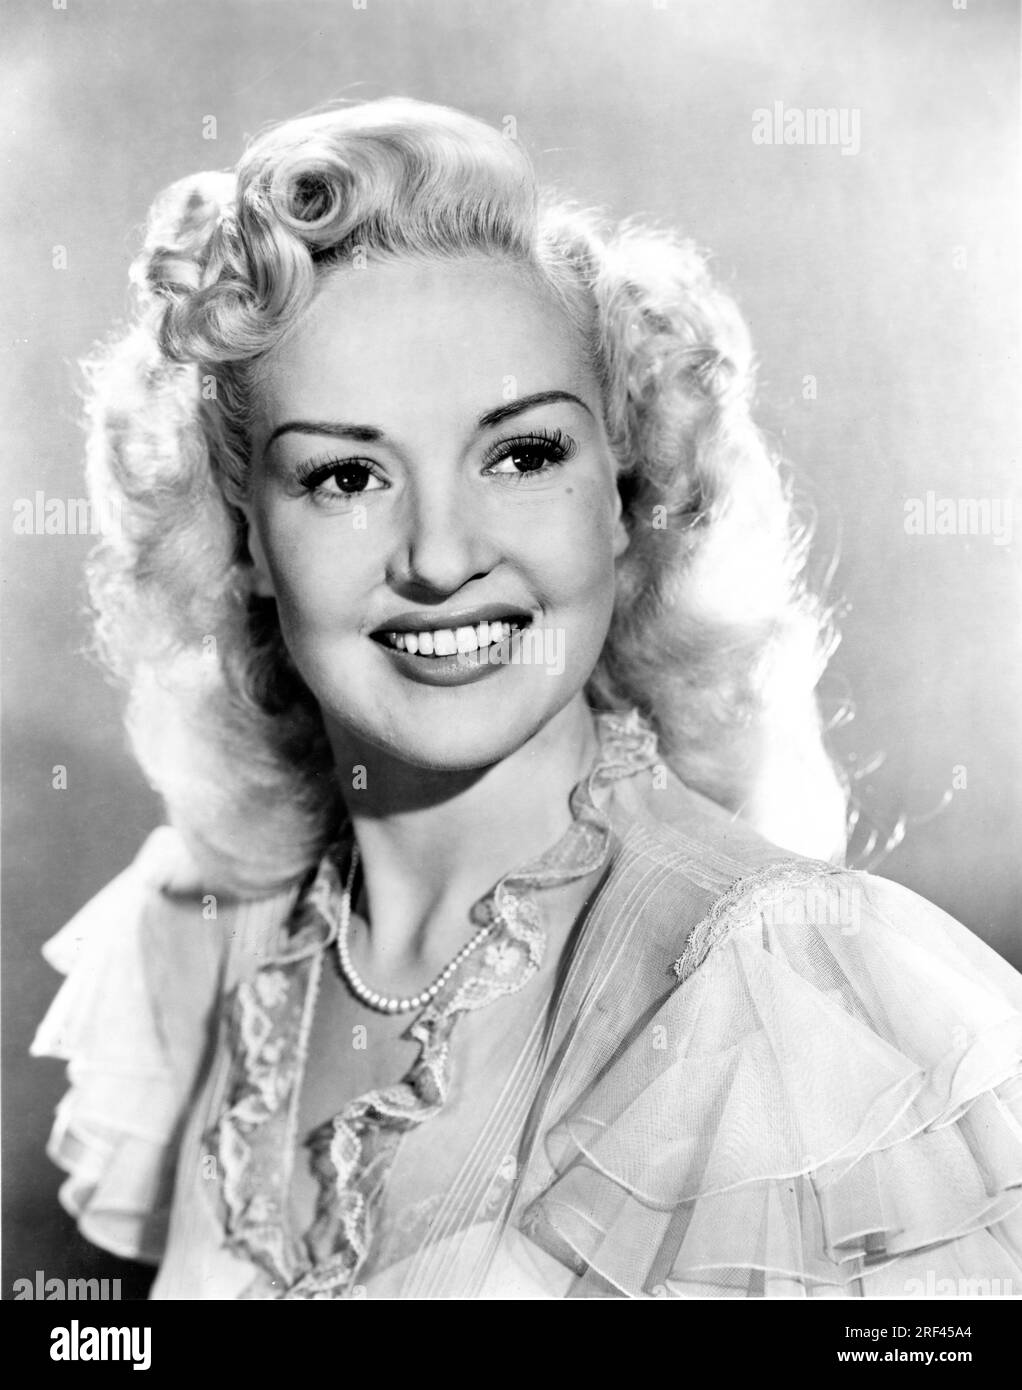 BETTY GRABLE Ritratto in THE DOLLY SISTERS 1945, regista IRVING CUMMINGS, costume design Orry-Kelly, Twentieth Century Fox Foto Stock